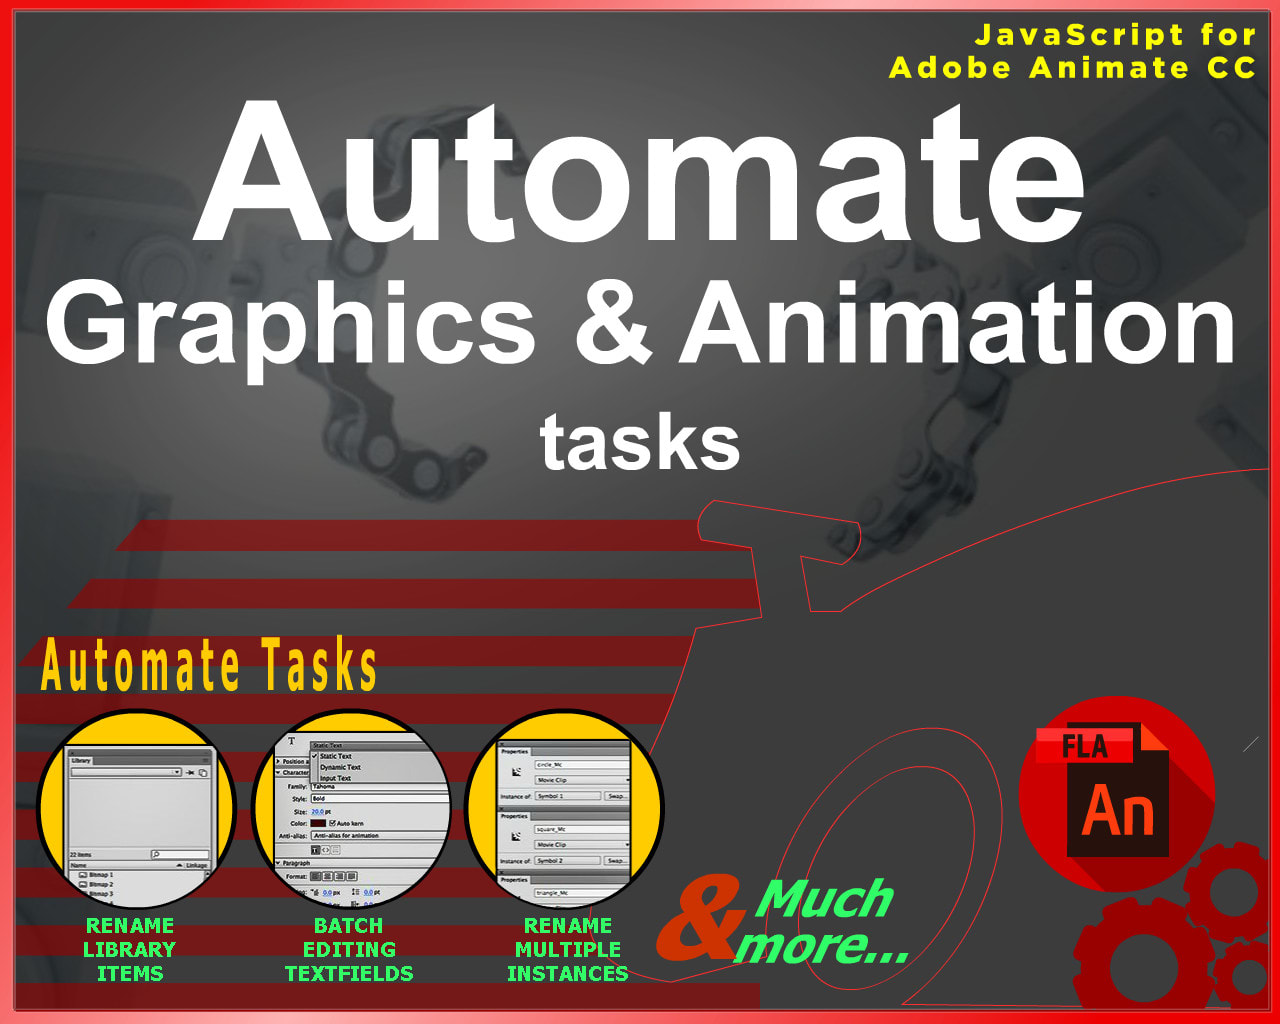 Automate your animation and graphics work by Vishwasgagrani | Fiverr